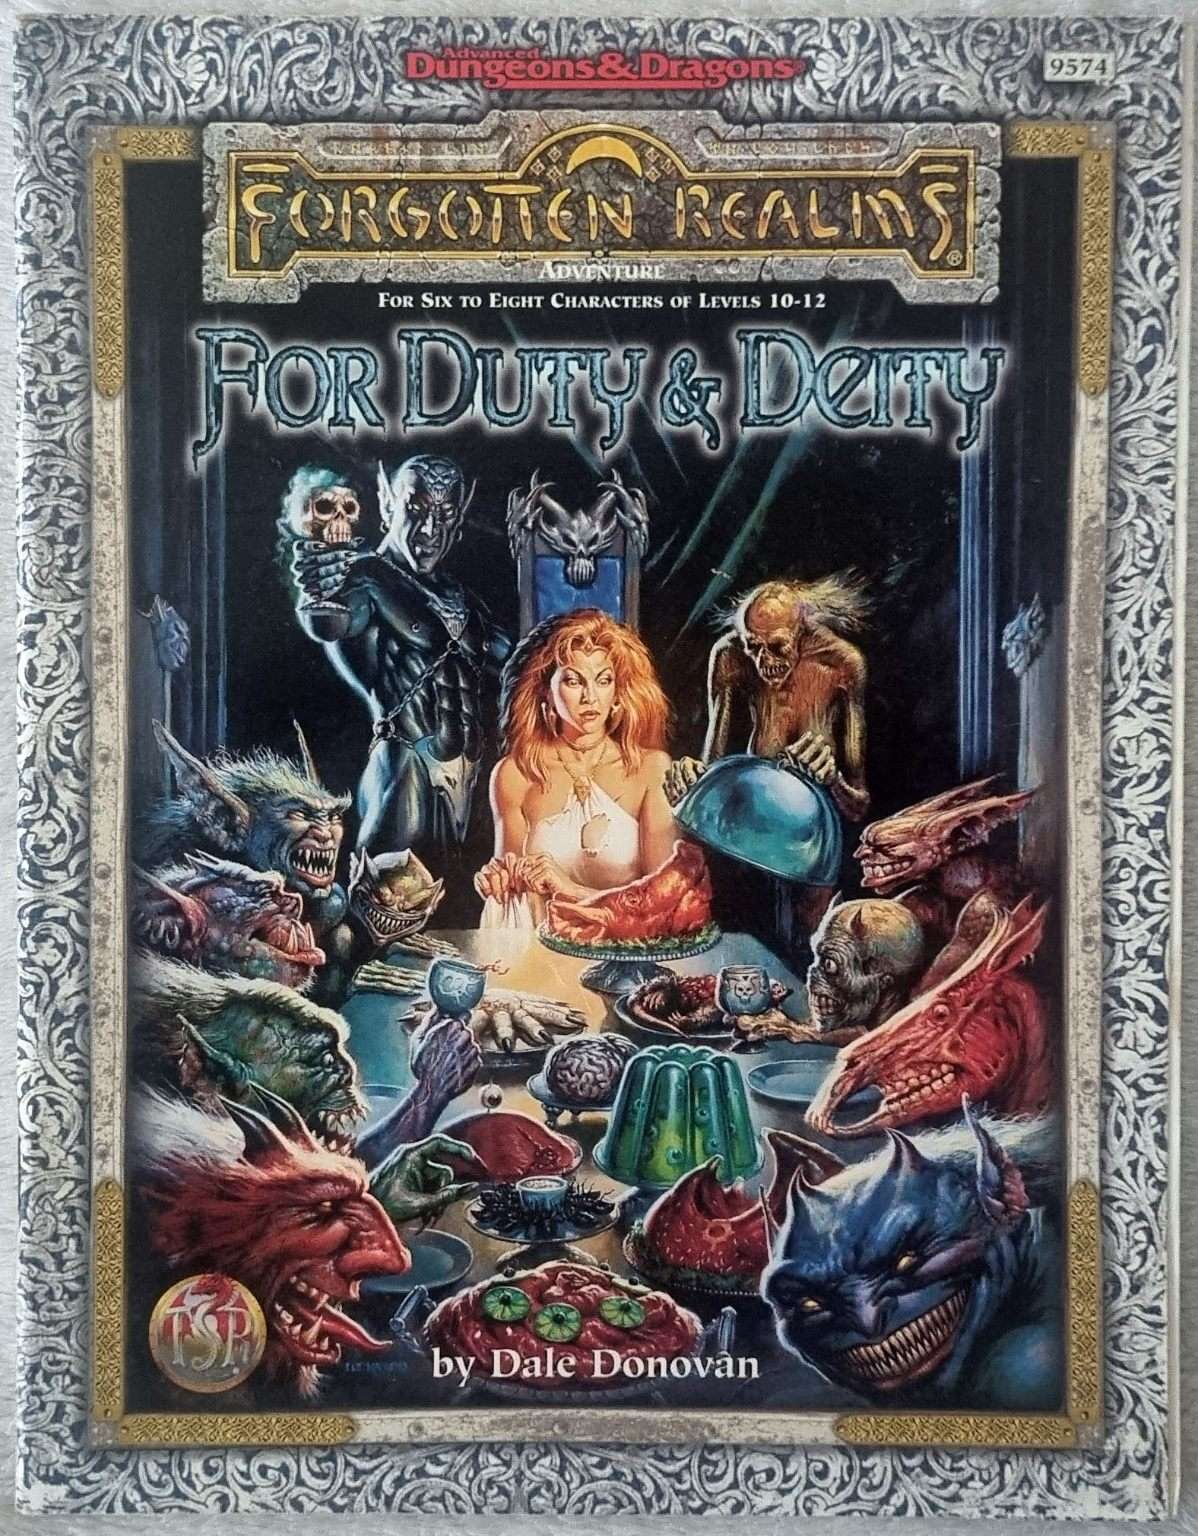 Advanced Dungeons and Dragons - Forgotten Realms - For Duty & Deity